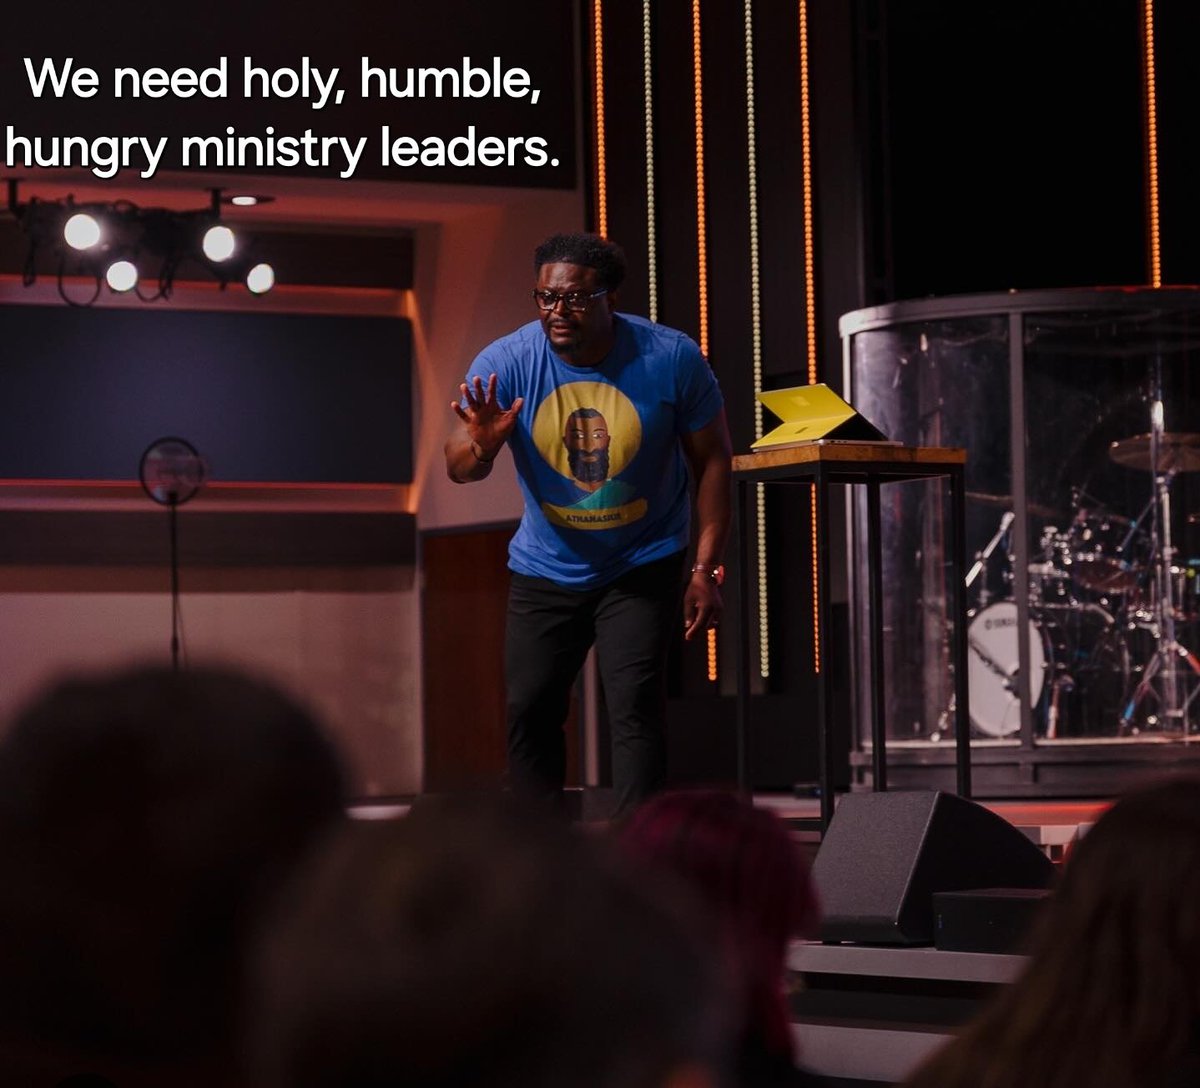 We need holy, humble, hungry ministry leaders.